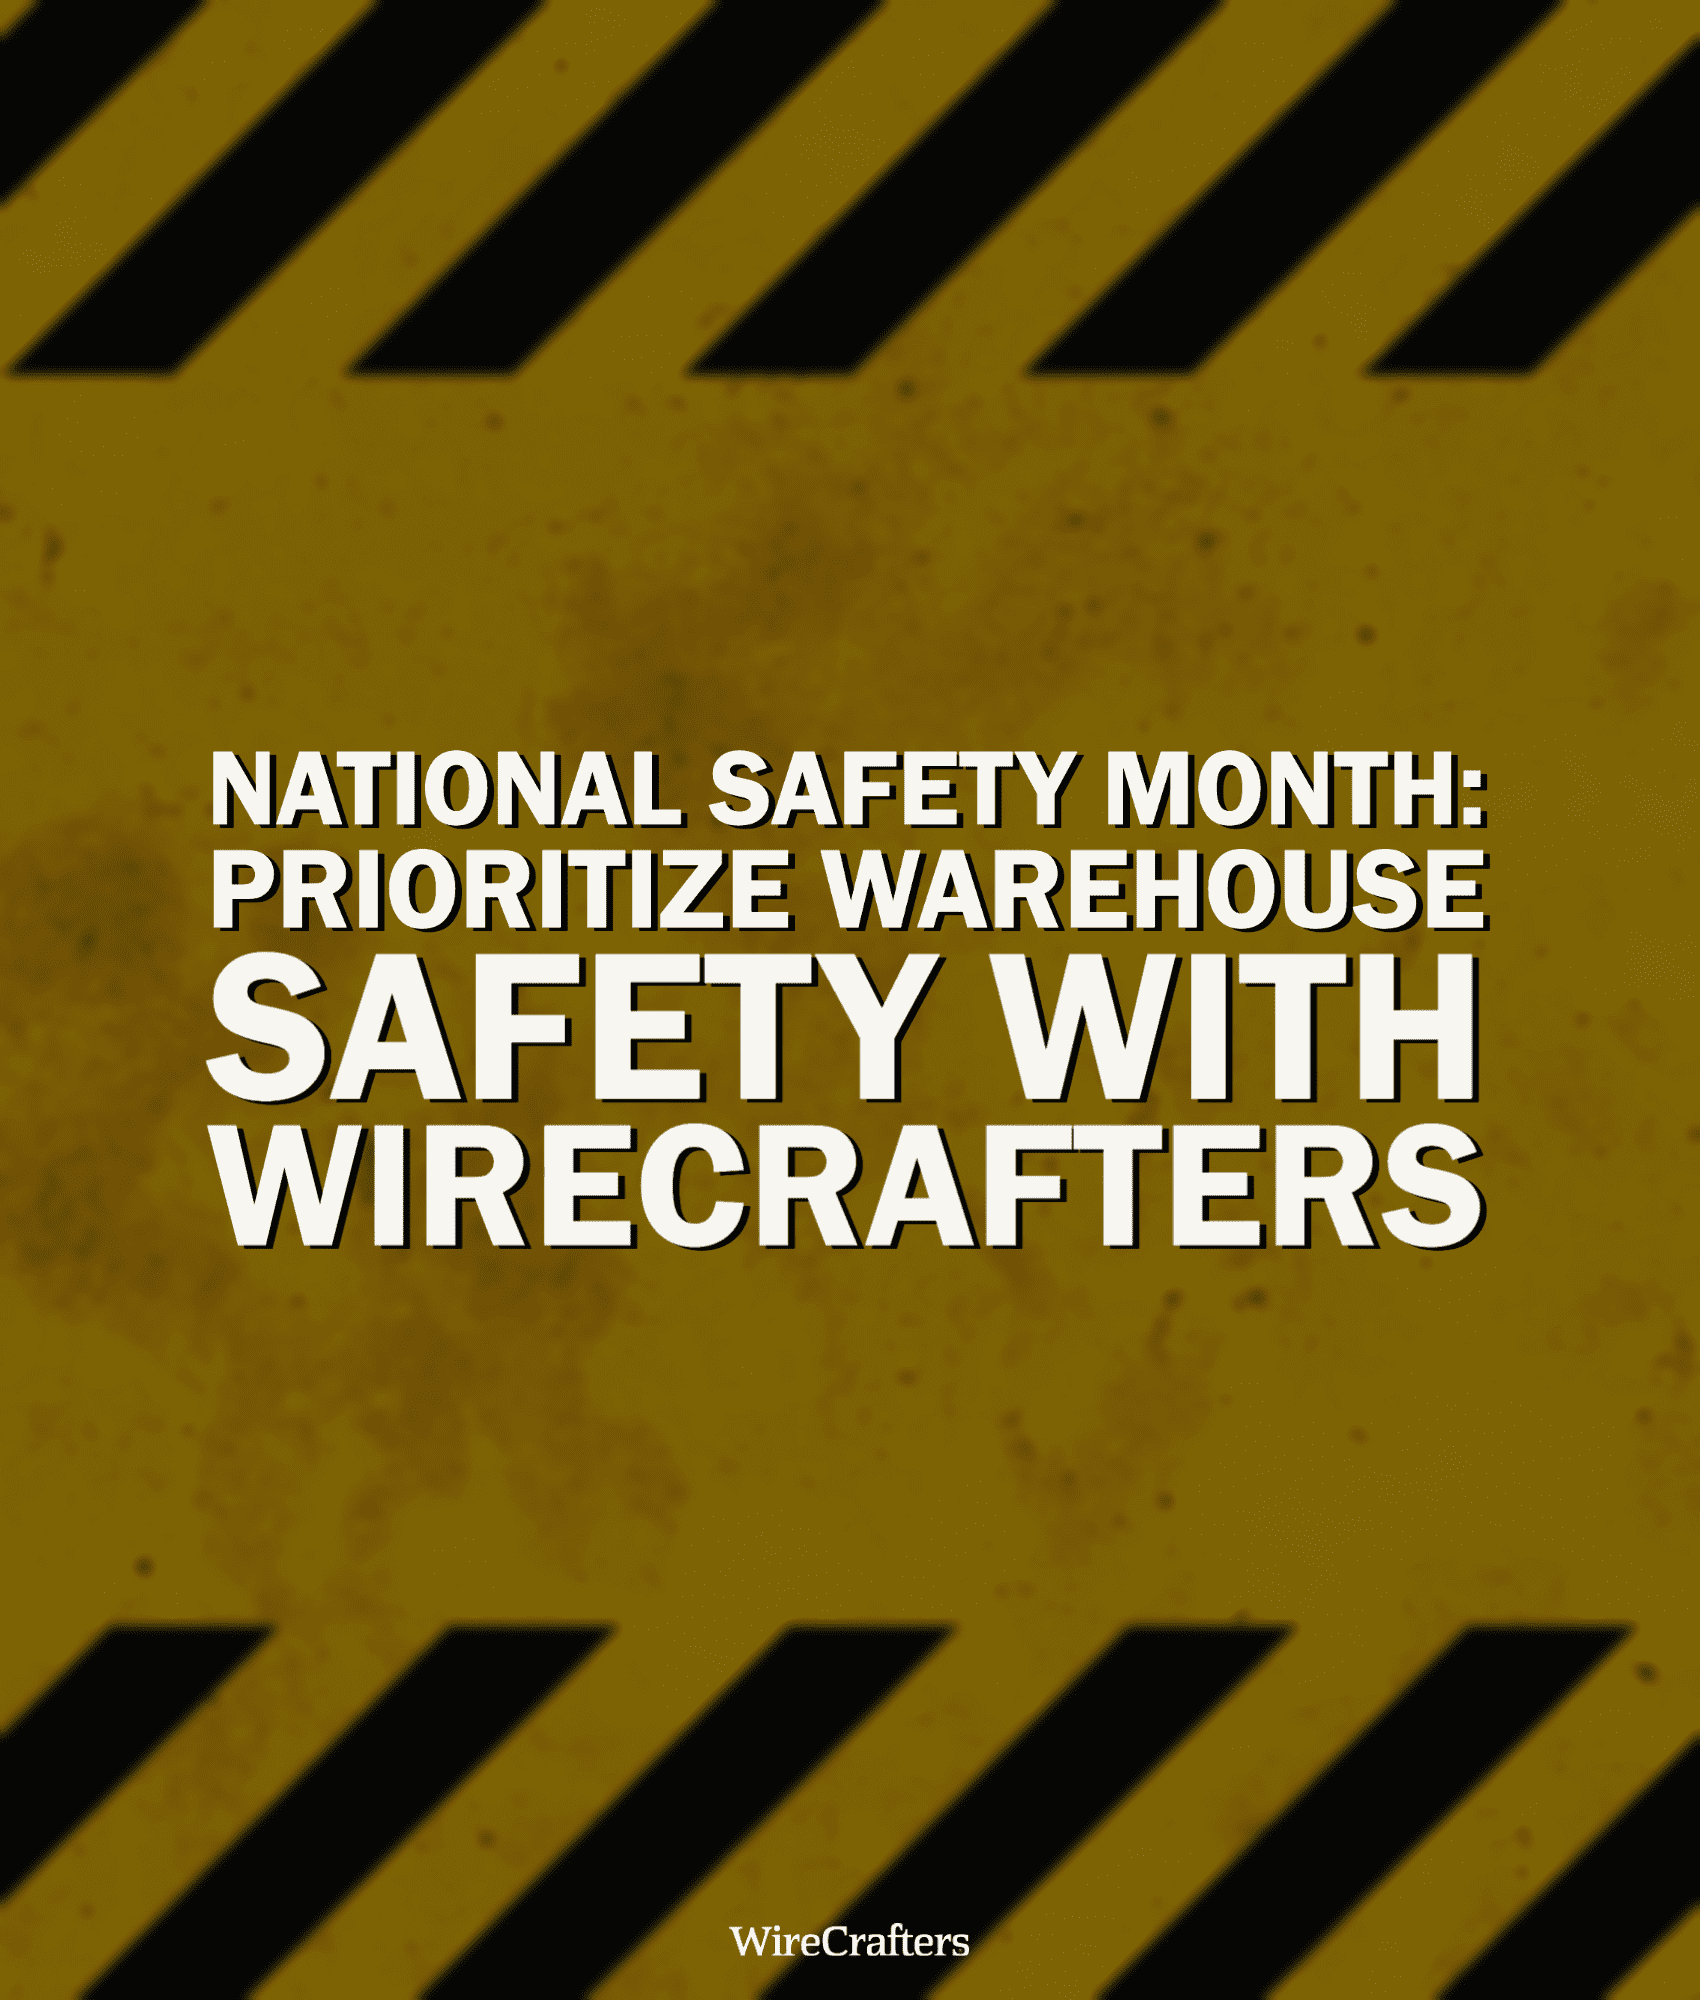 National Safety Month: Prioritize Warehouse Safety with WireCrafters